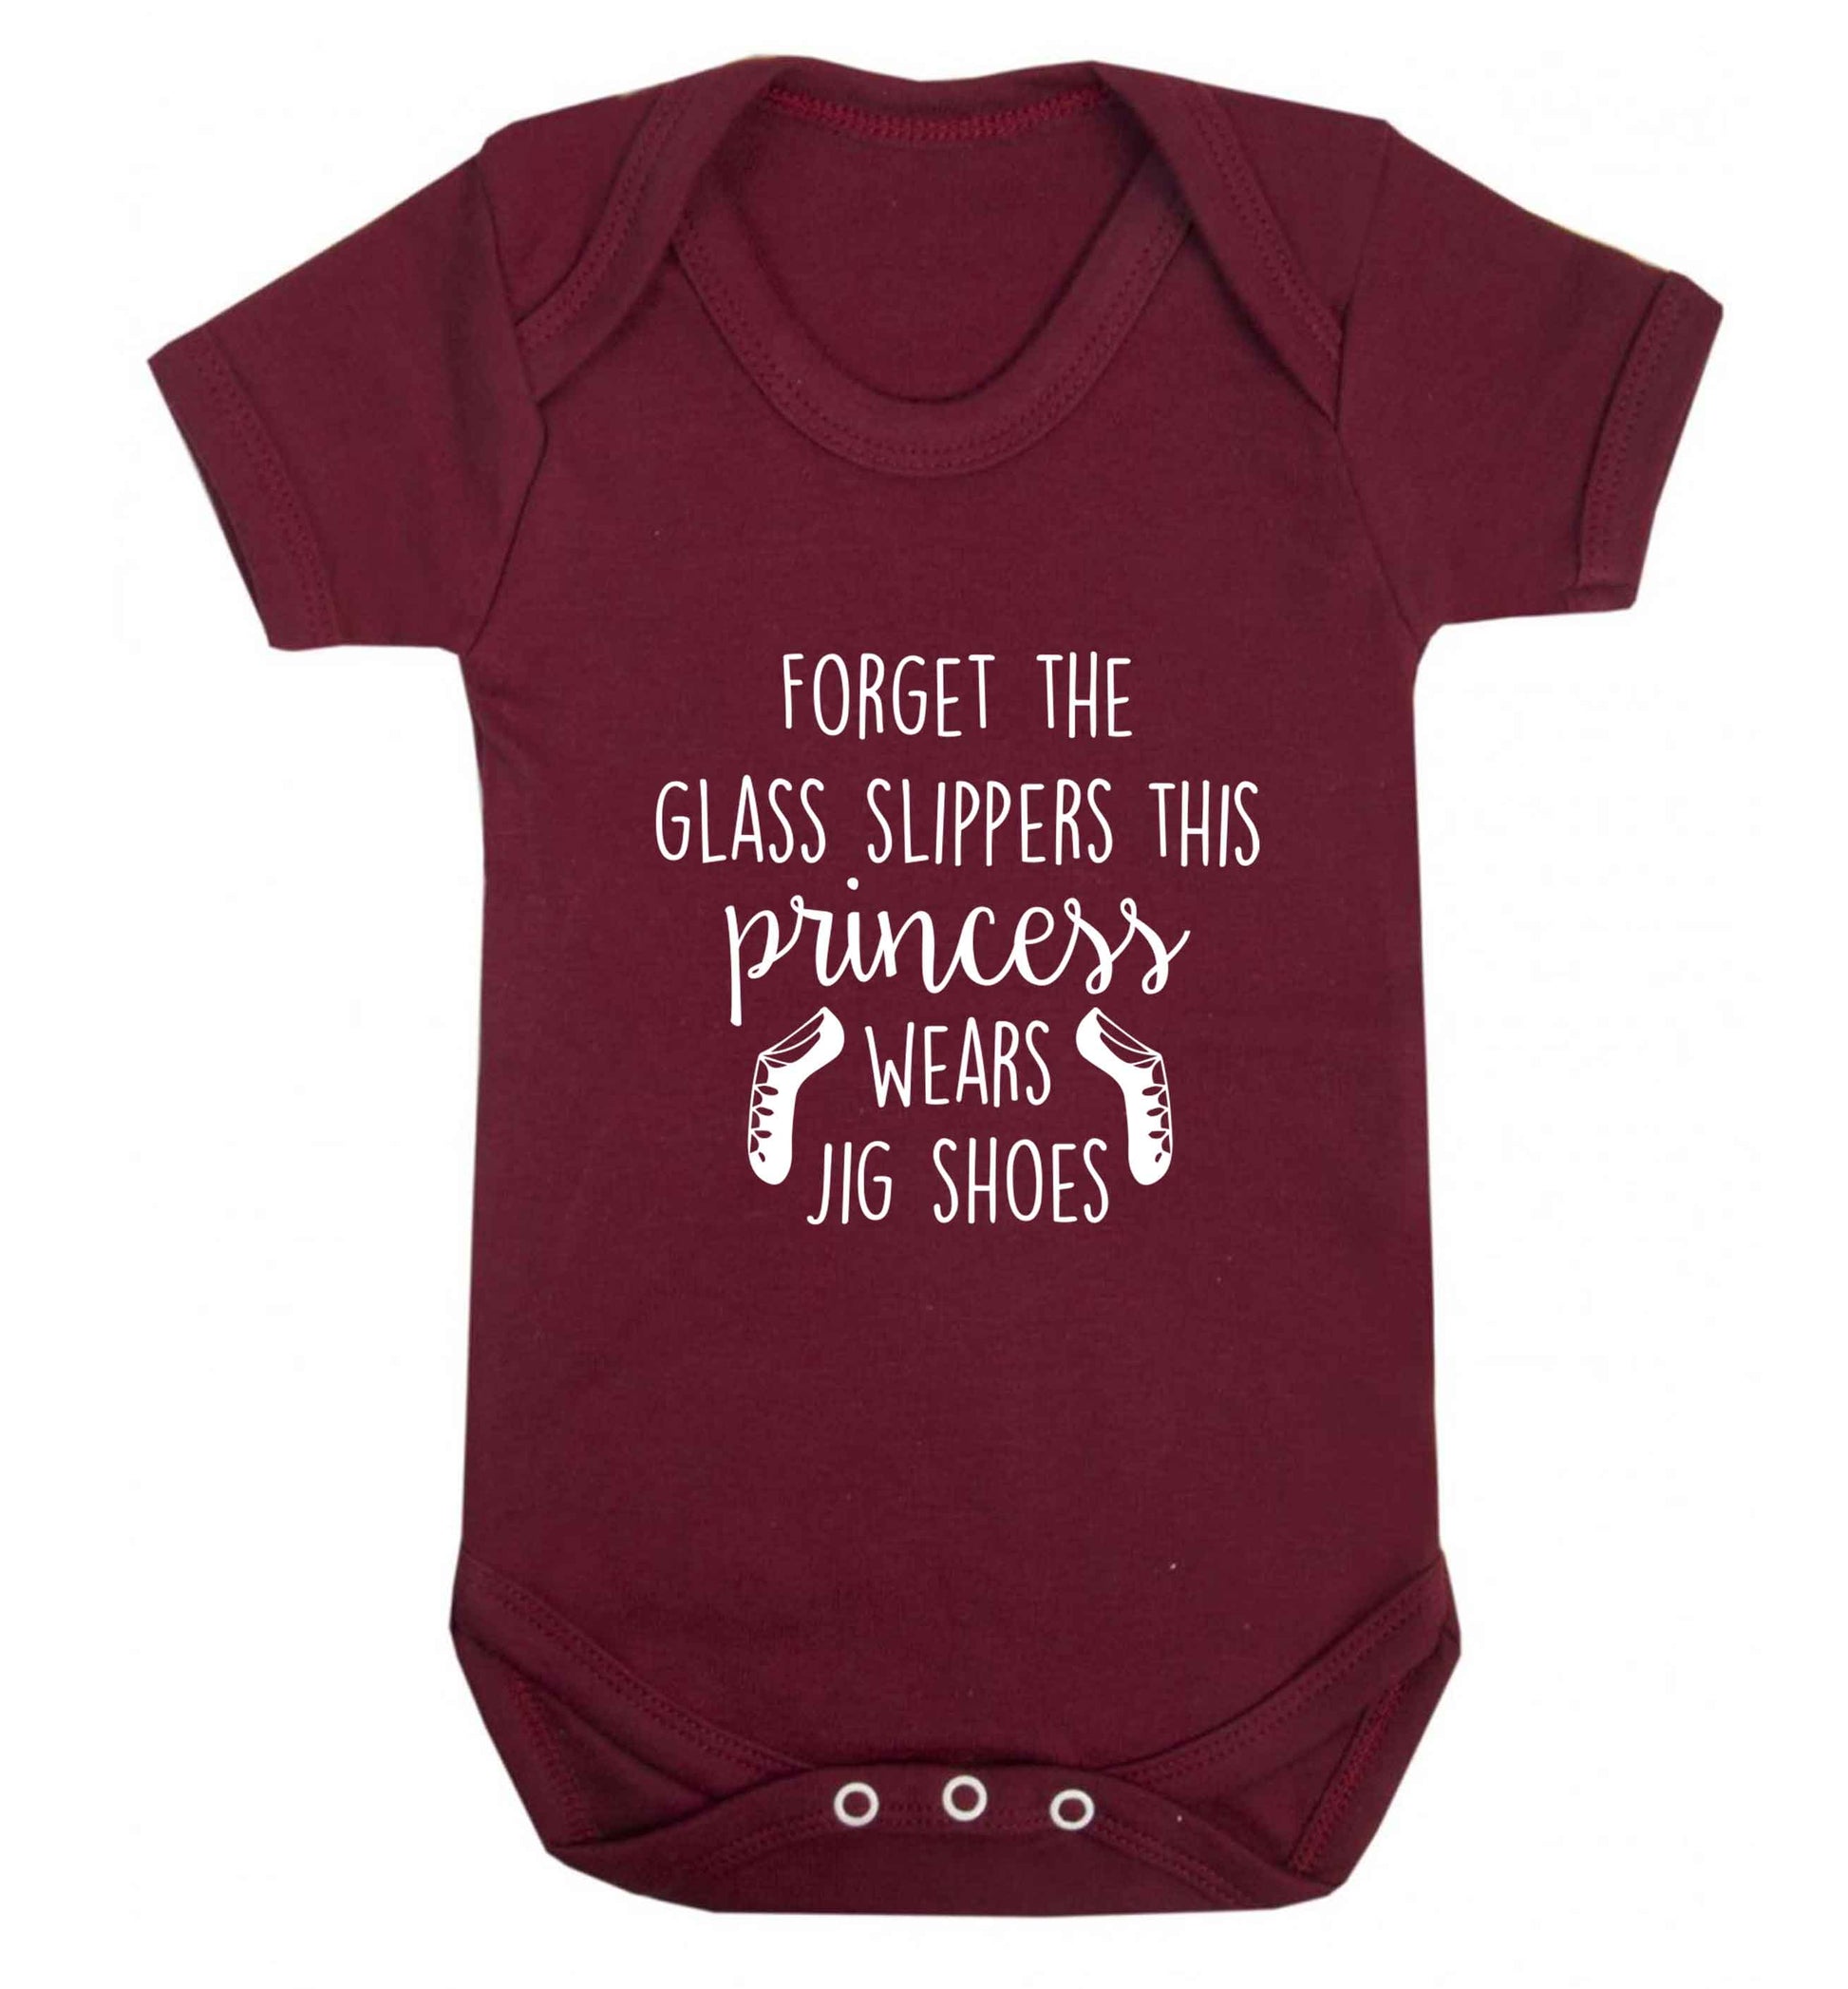 This princess wears jig shoes baby vest maroon 18-24 months